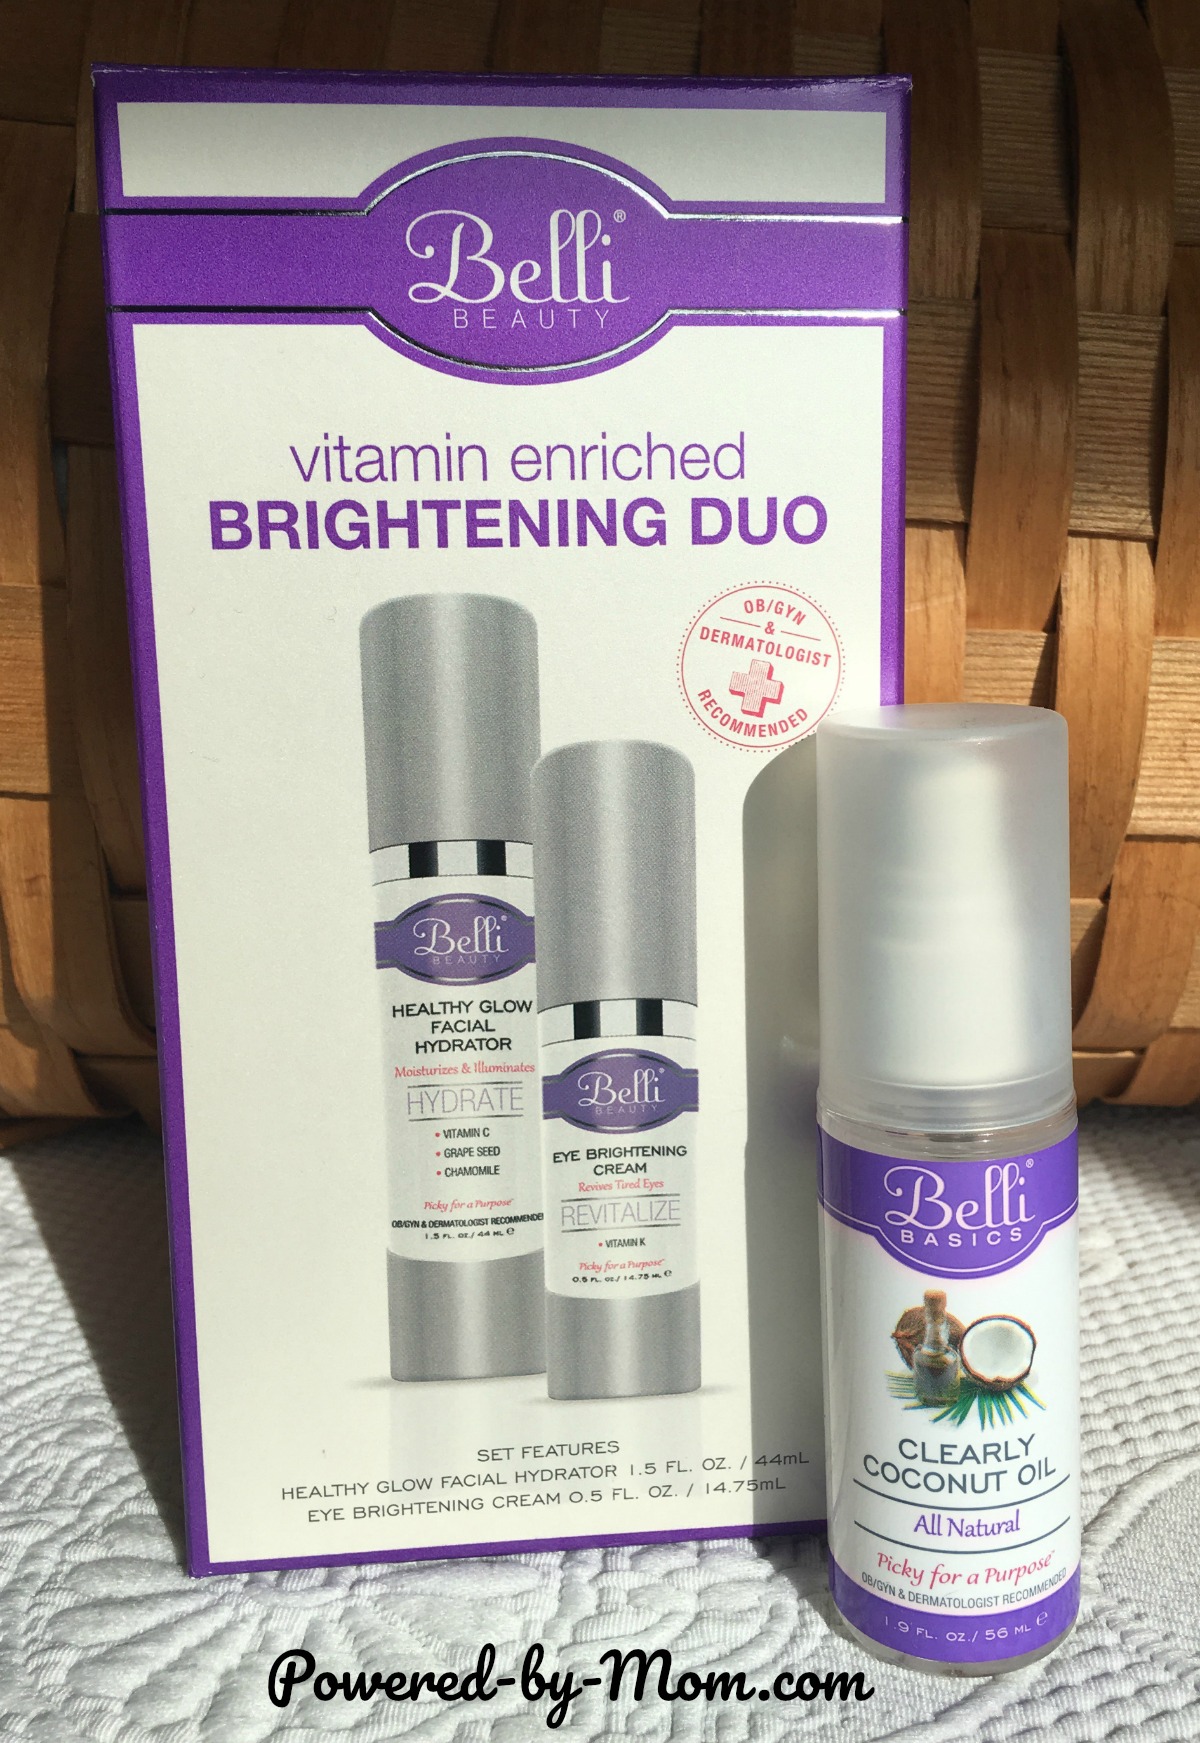 Belli Beauty Review of Daily Beauty Routine Products - Powered by Mom